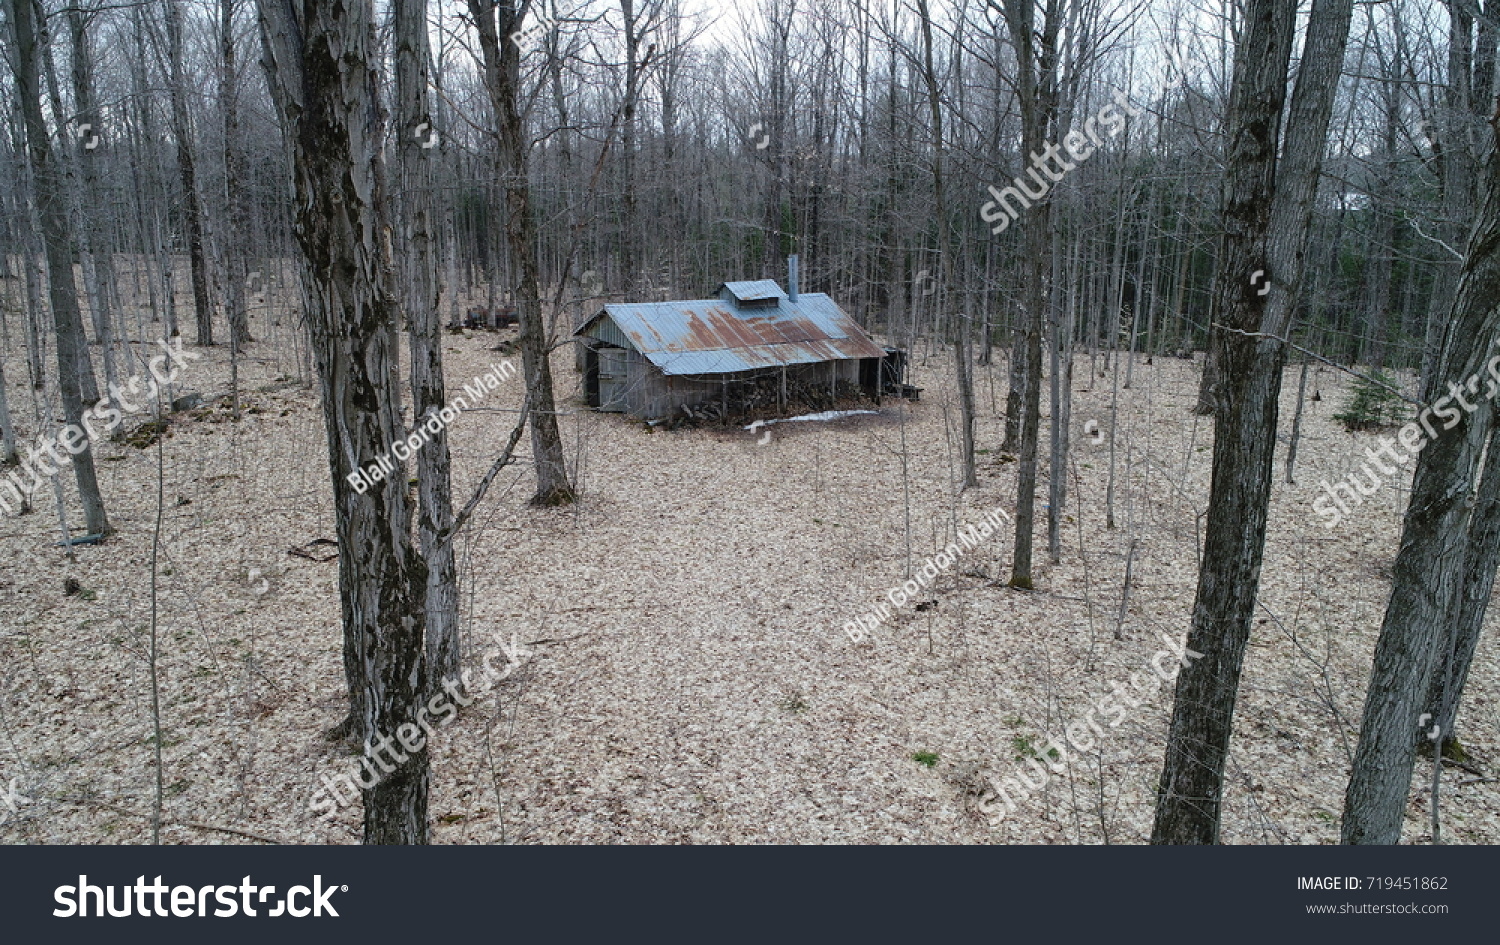 Rustic Old Maple Syrup Shack In The Woods In Early Spring #719451862